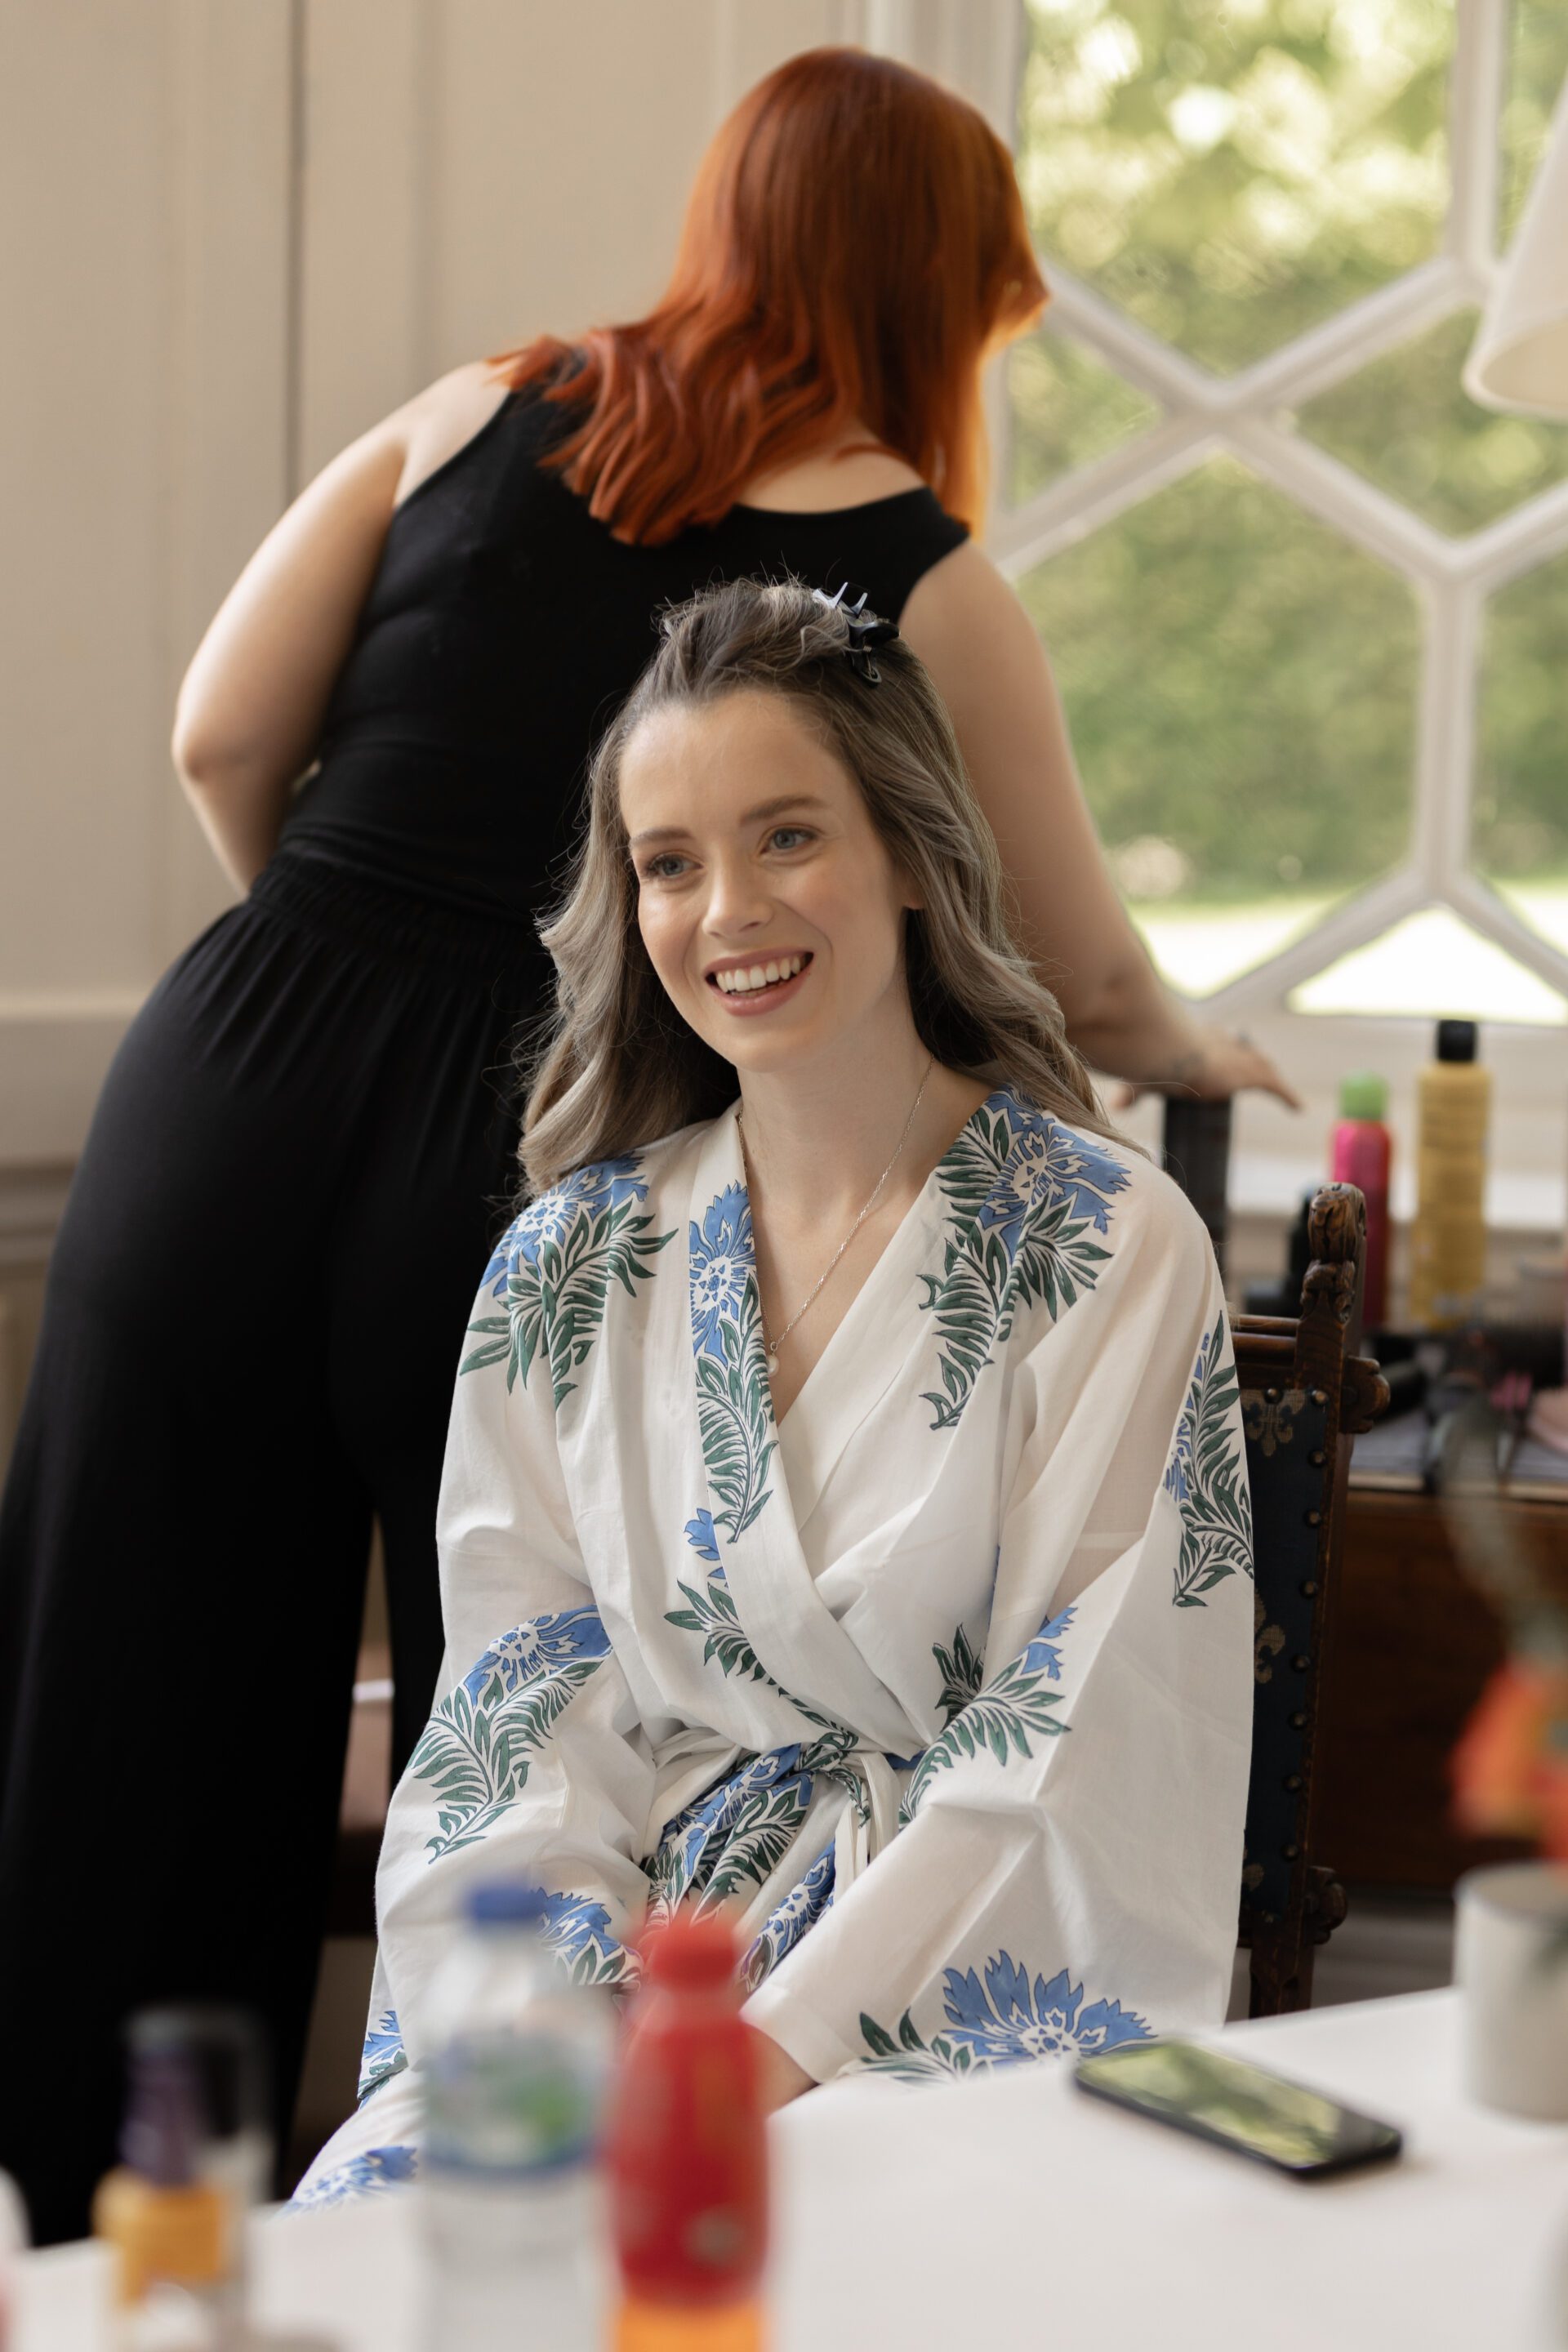 The bride gets ready with her loved ones at Gloucestershire wedding venue, Frampton Court Estate